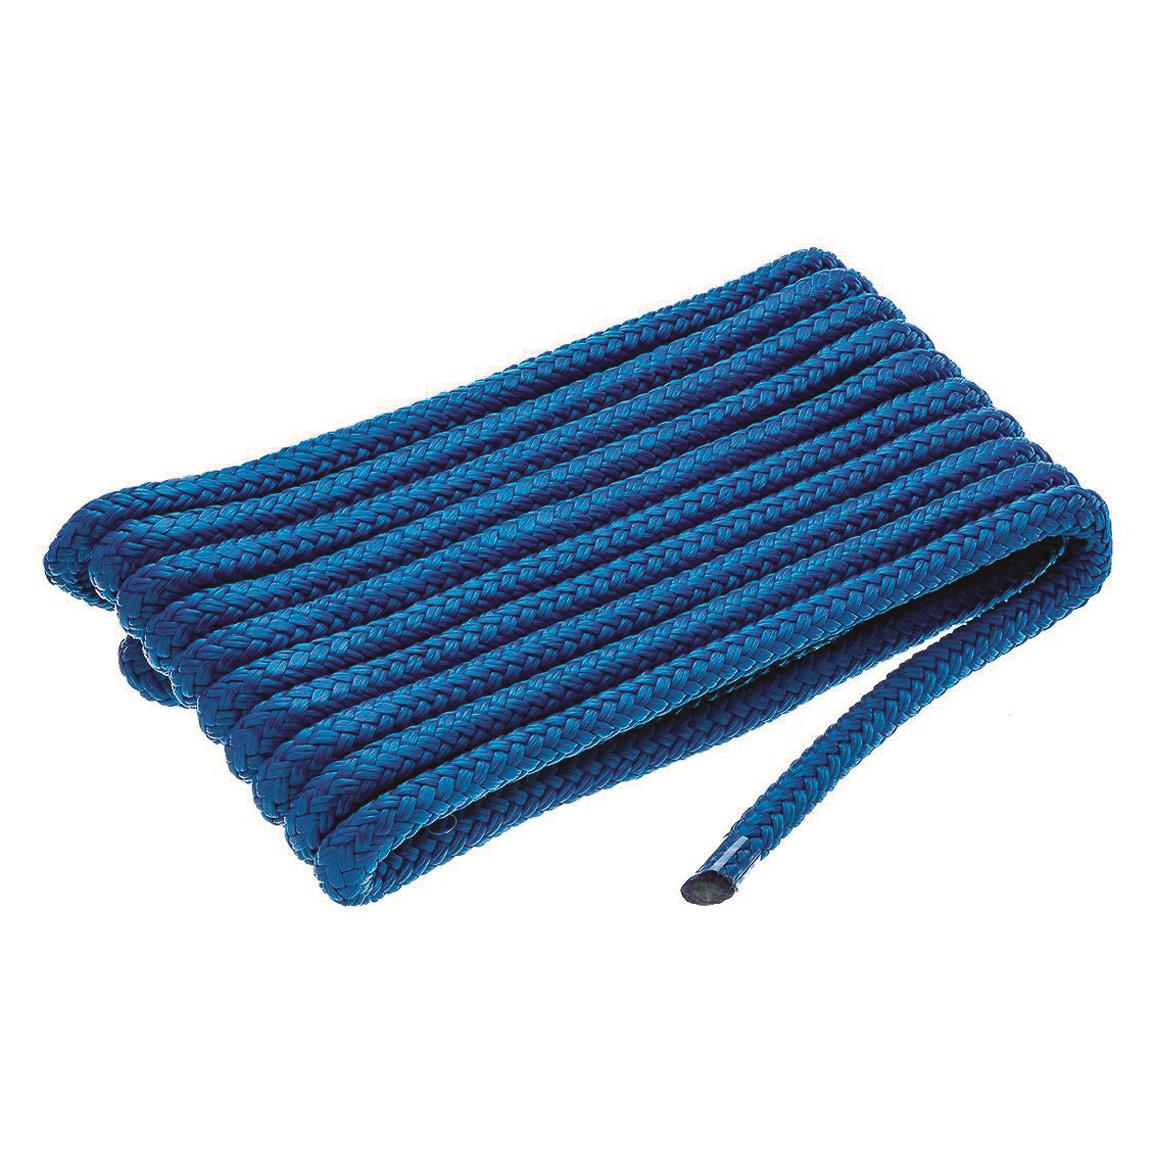 Attwood Premium Double-Braided Nylon Dock Line, 3/8" Thick x 15' Length, Blue